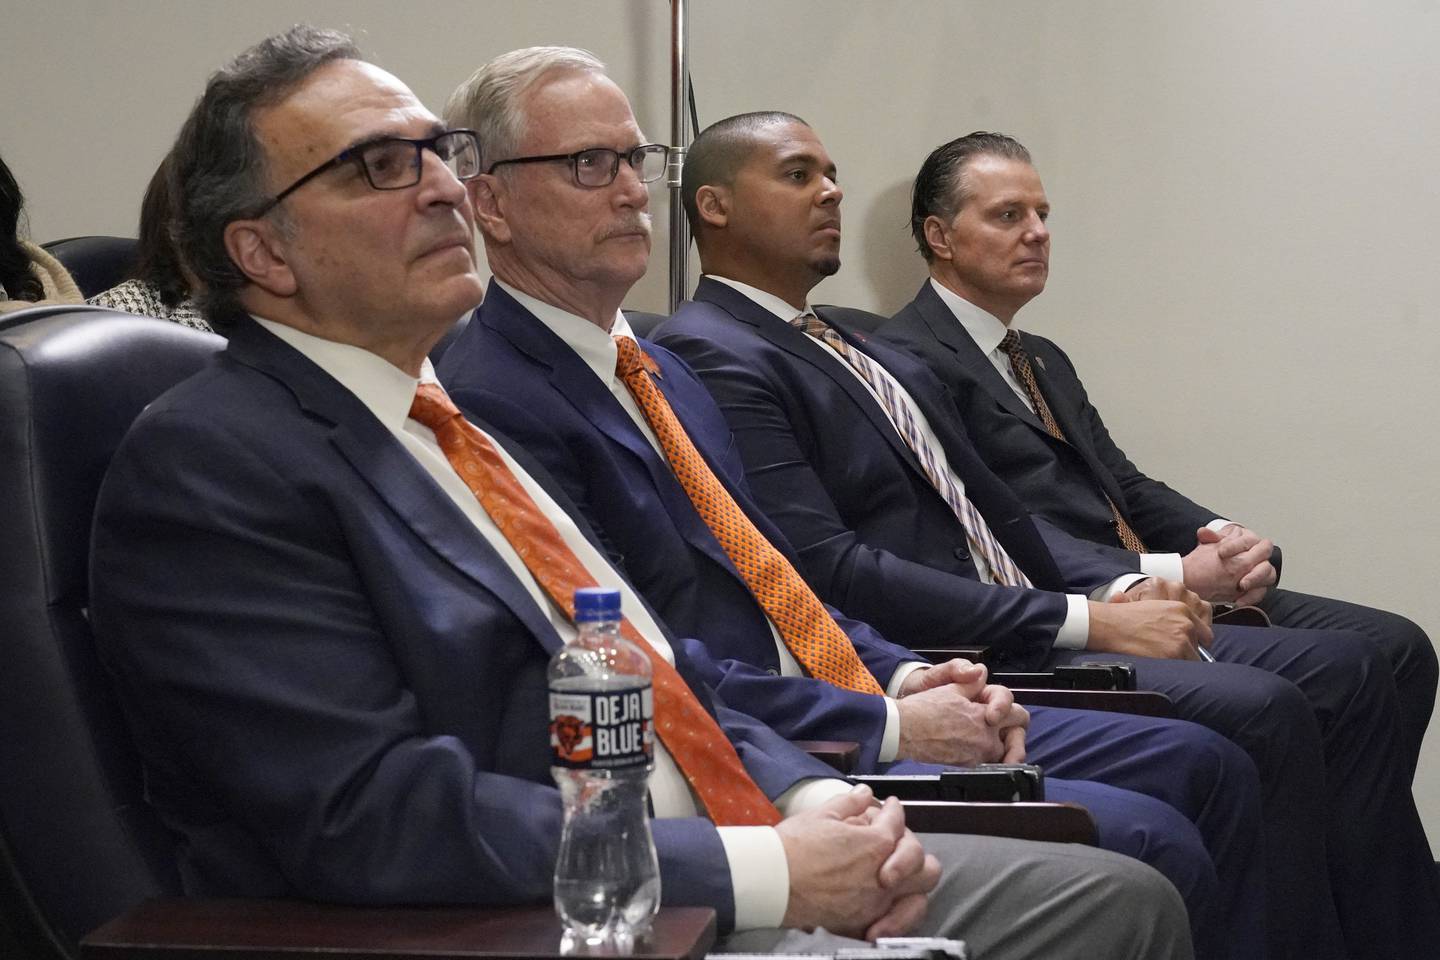 From left, Chicago Bears team President and CEO Ted Phillips, Chairman George H. McCaskey, general manager Ryan Poles and head coach Matt Eberflus listen to new President & CEO Kevin Warren speech during a news conference at Halas Hall in Lake Forest, Ill., Tuesday, Jan. 17, 2023.